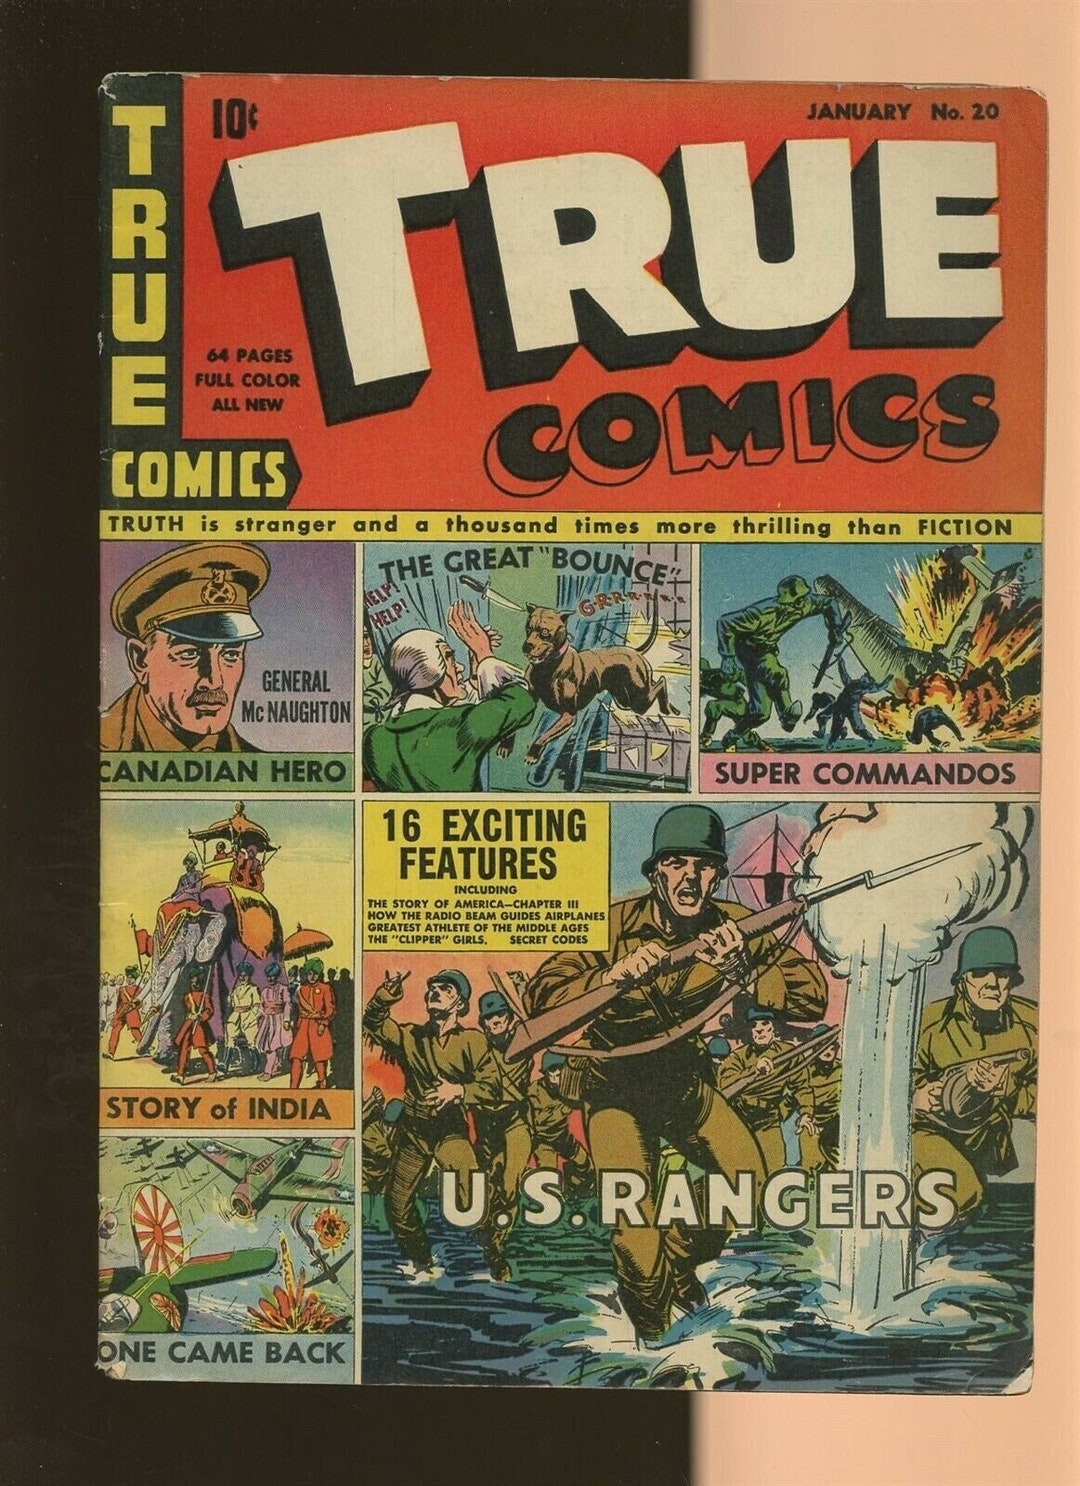 and　1941　1943.　20.　日本　Published　Jan　Biography　Etsy　True　Comics